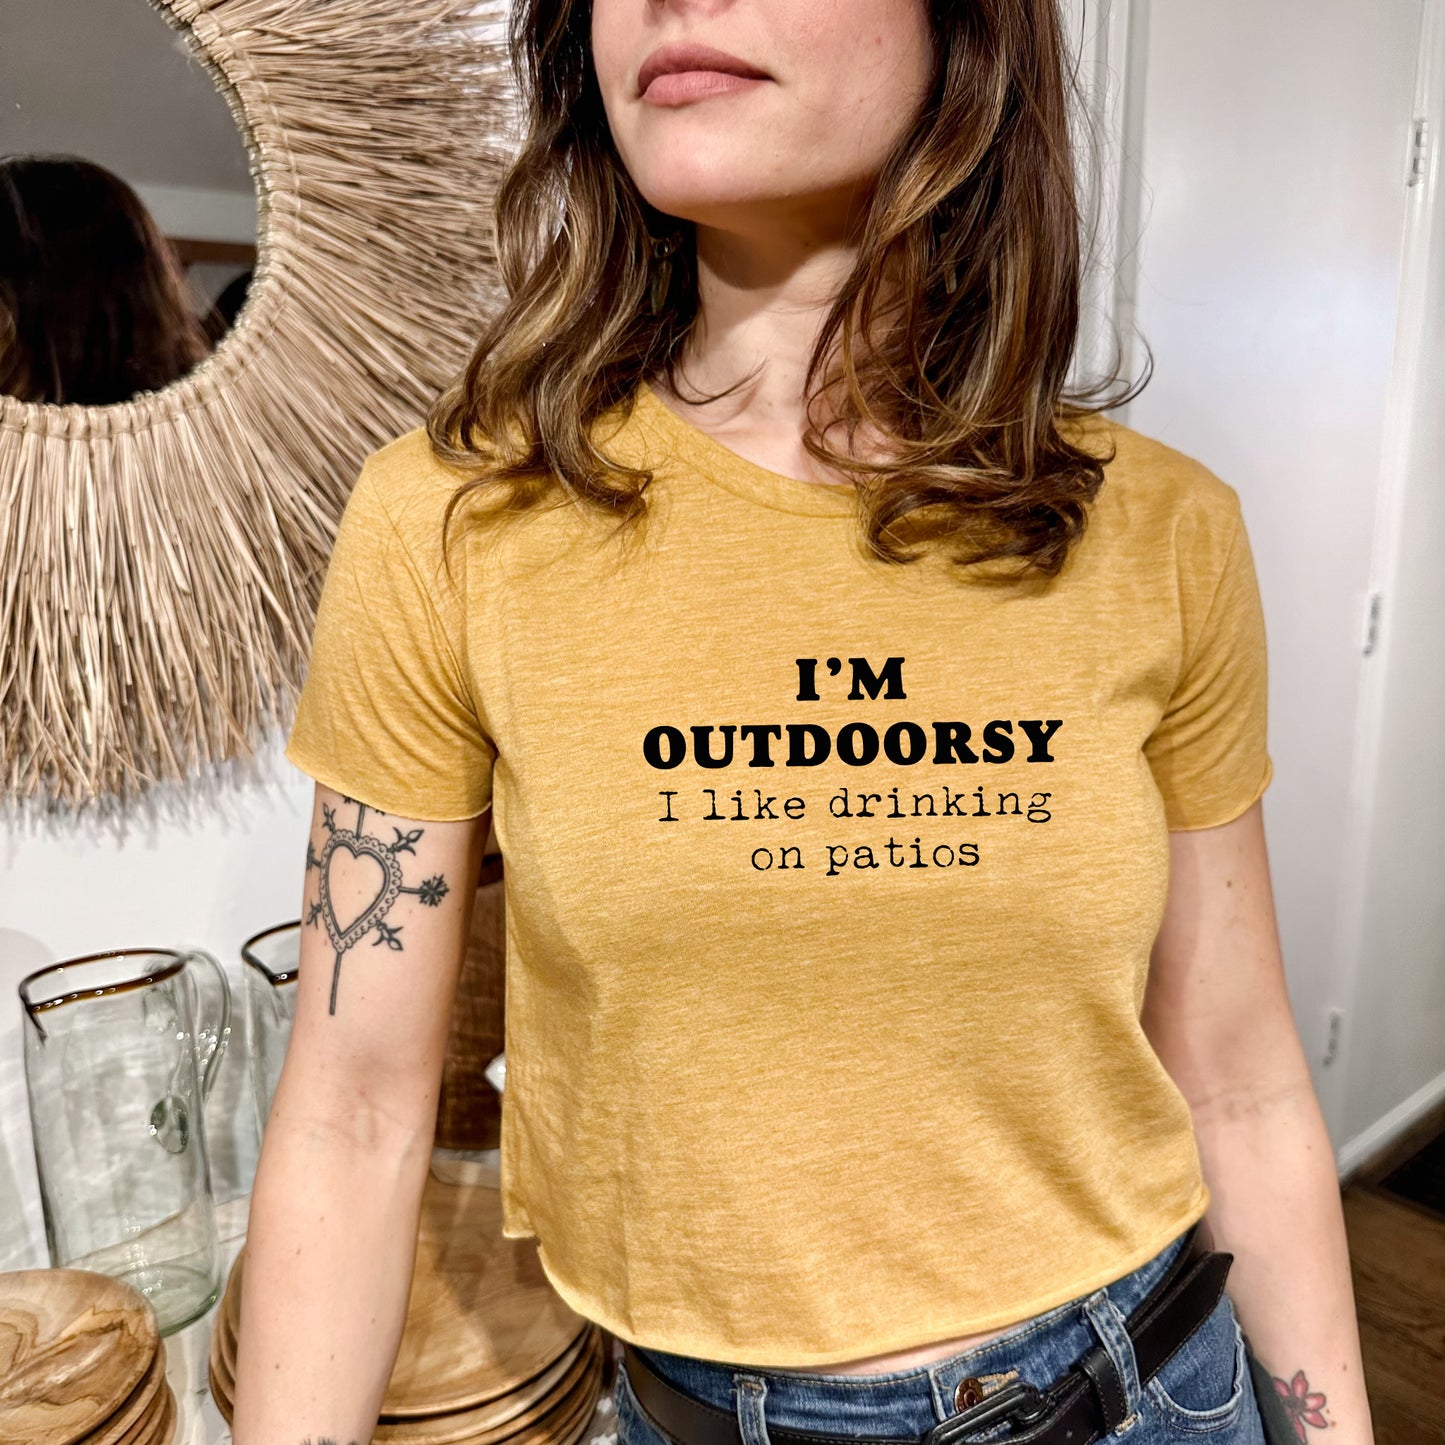 I'm Outdoorsy (I Like Drinking On Patios) - Women's Crop Tee - Heather Gray or Gold